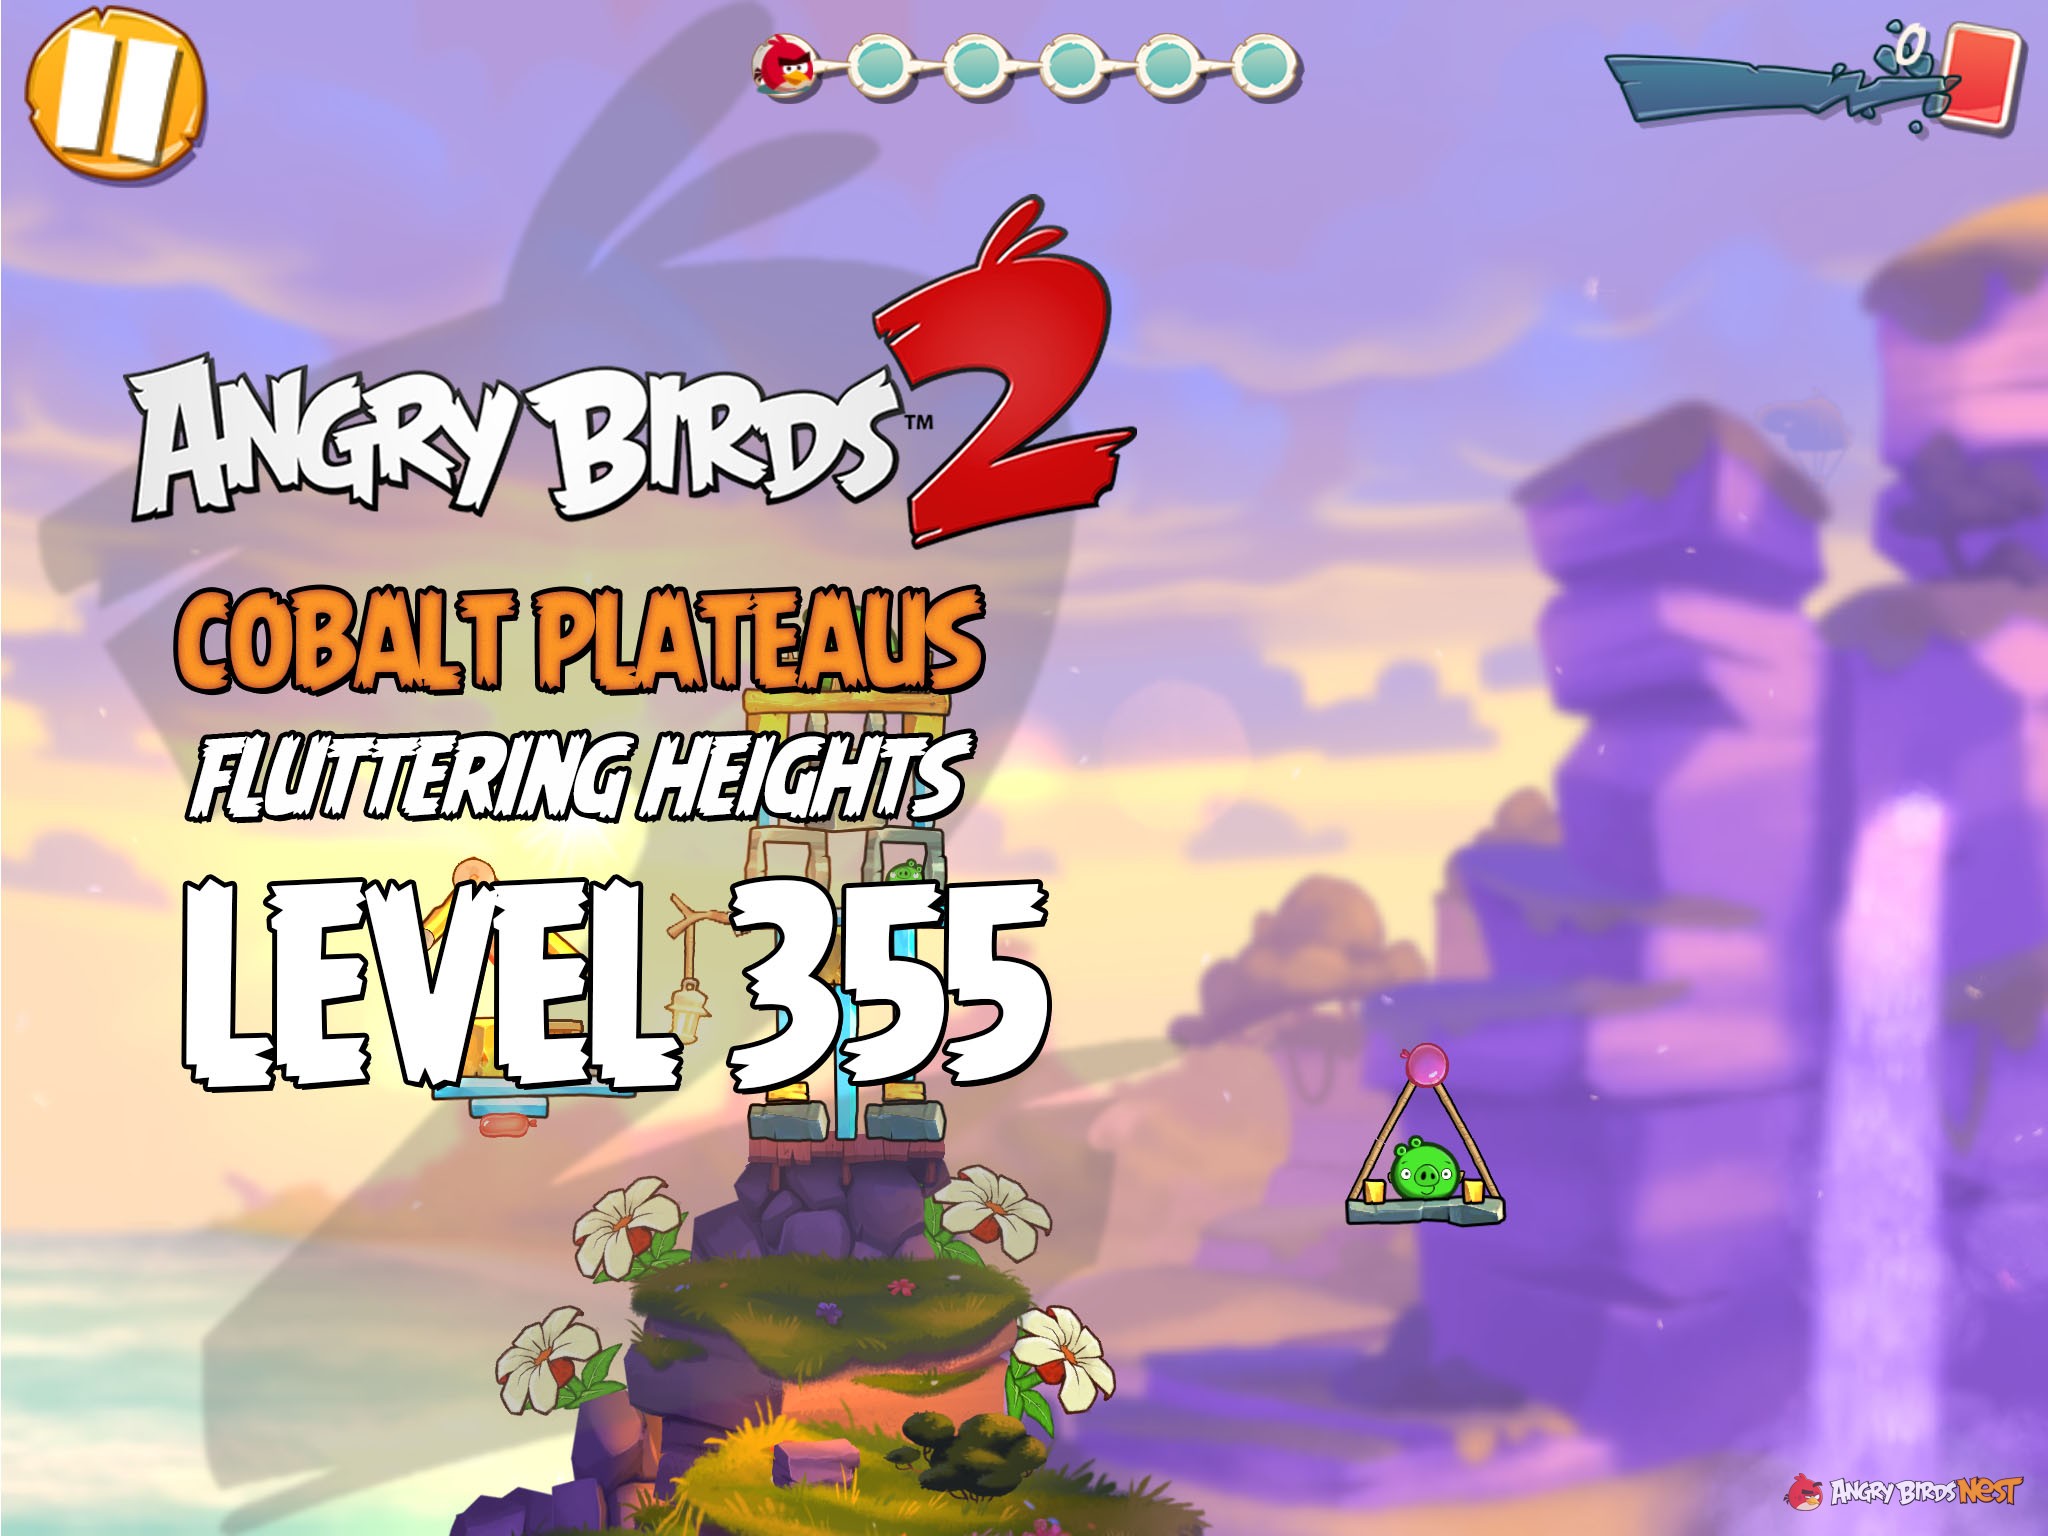 Angry Birds 2 Cobalt Plateaus Fluttering Heights Level 355